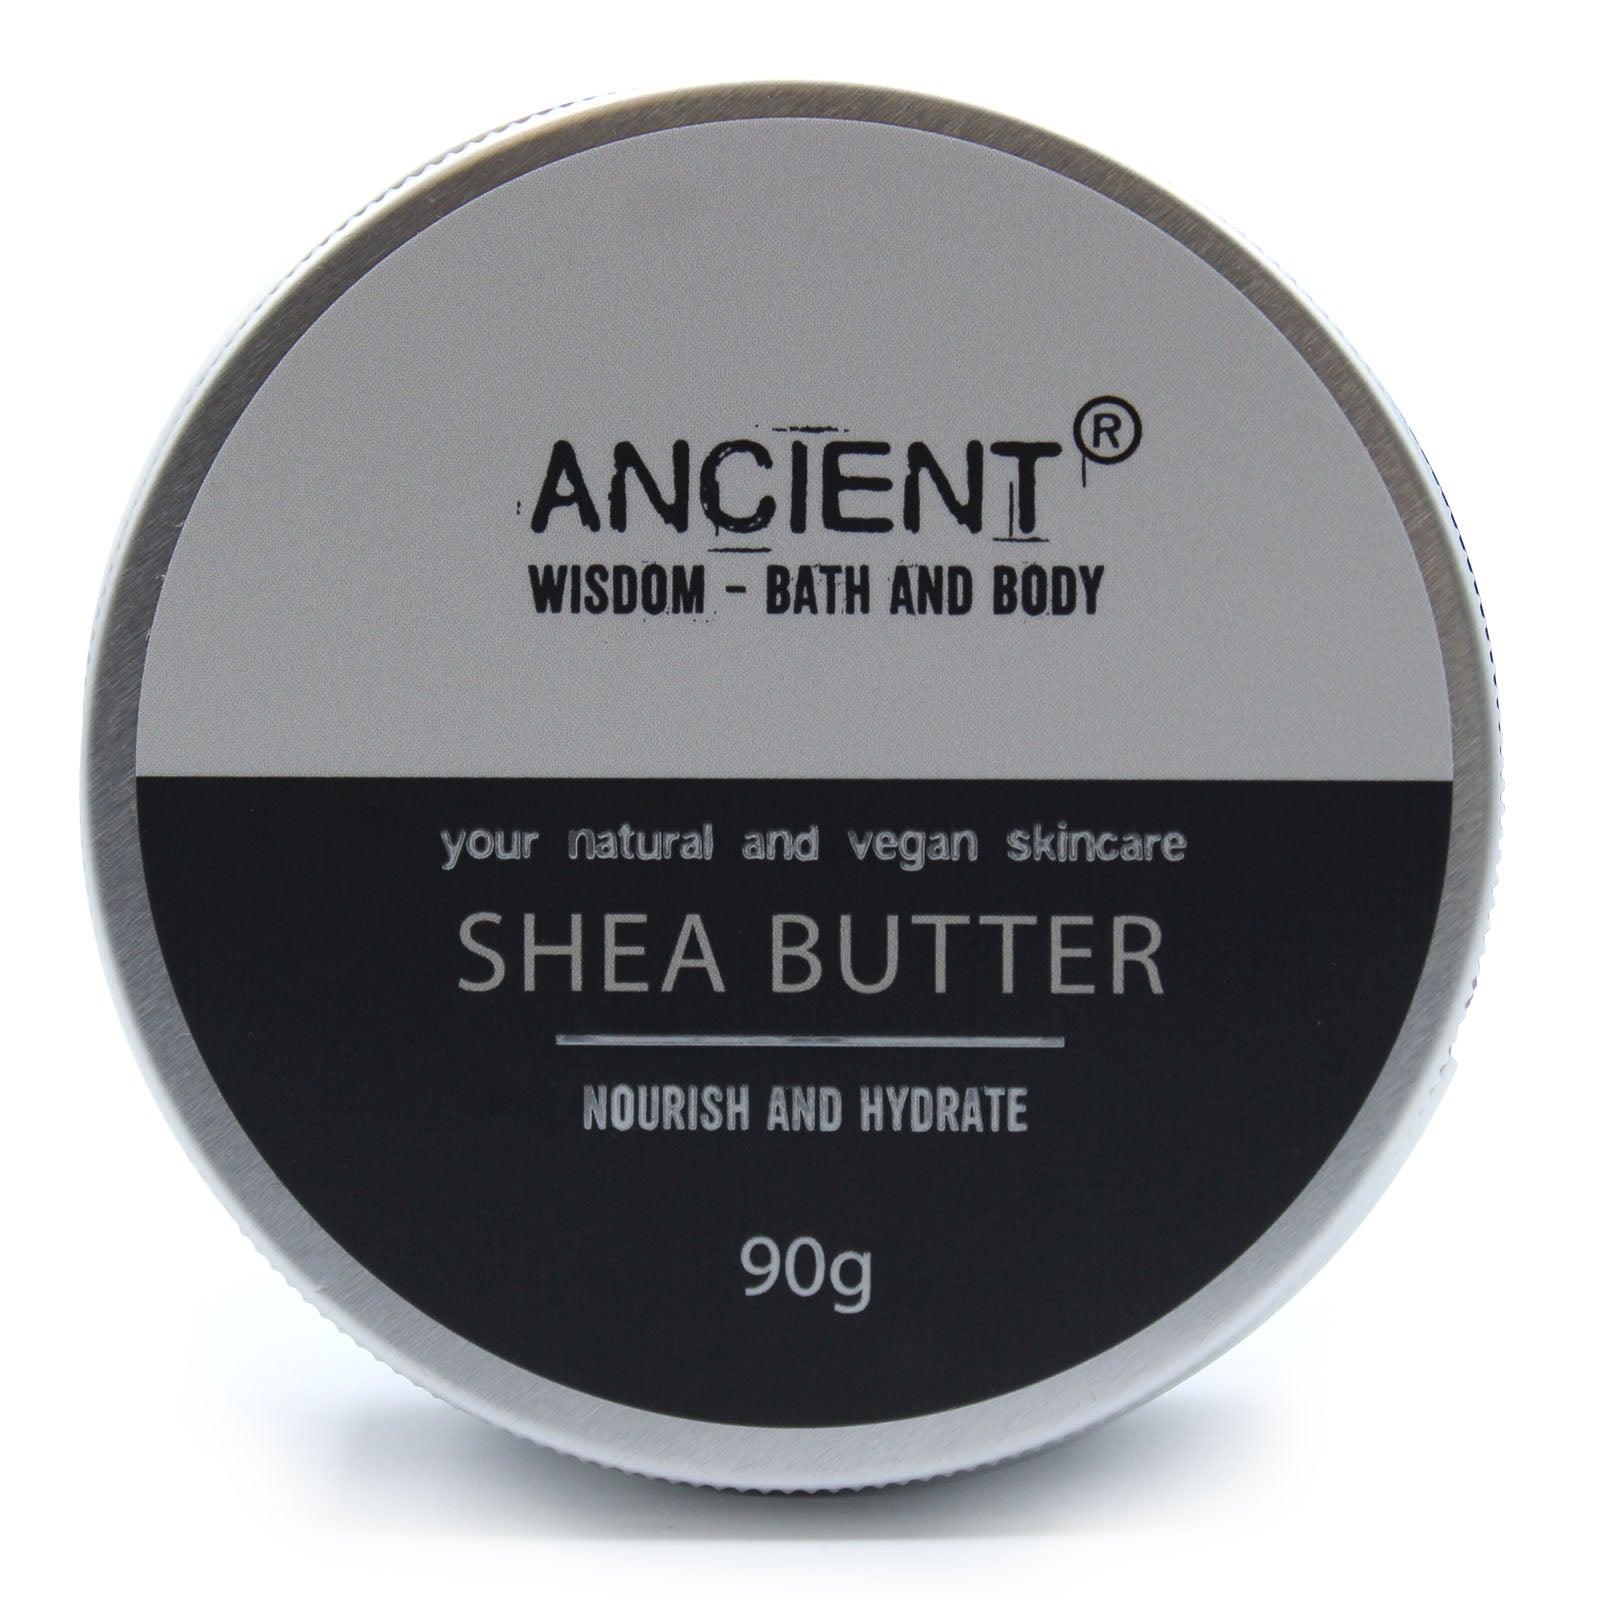 Pure Body Butter 90g - Shea Butter - DuvetDay.co.uk